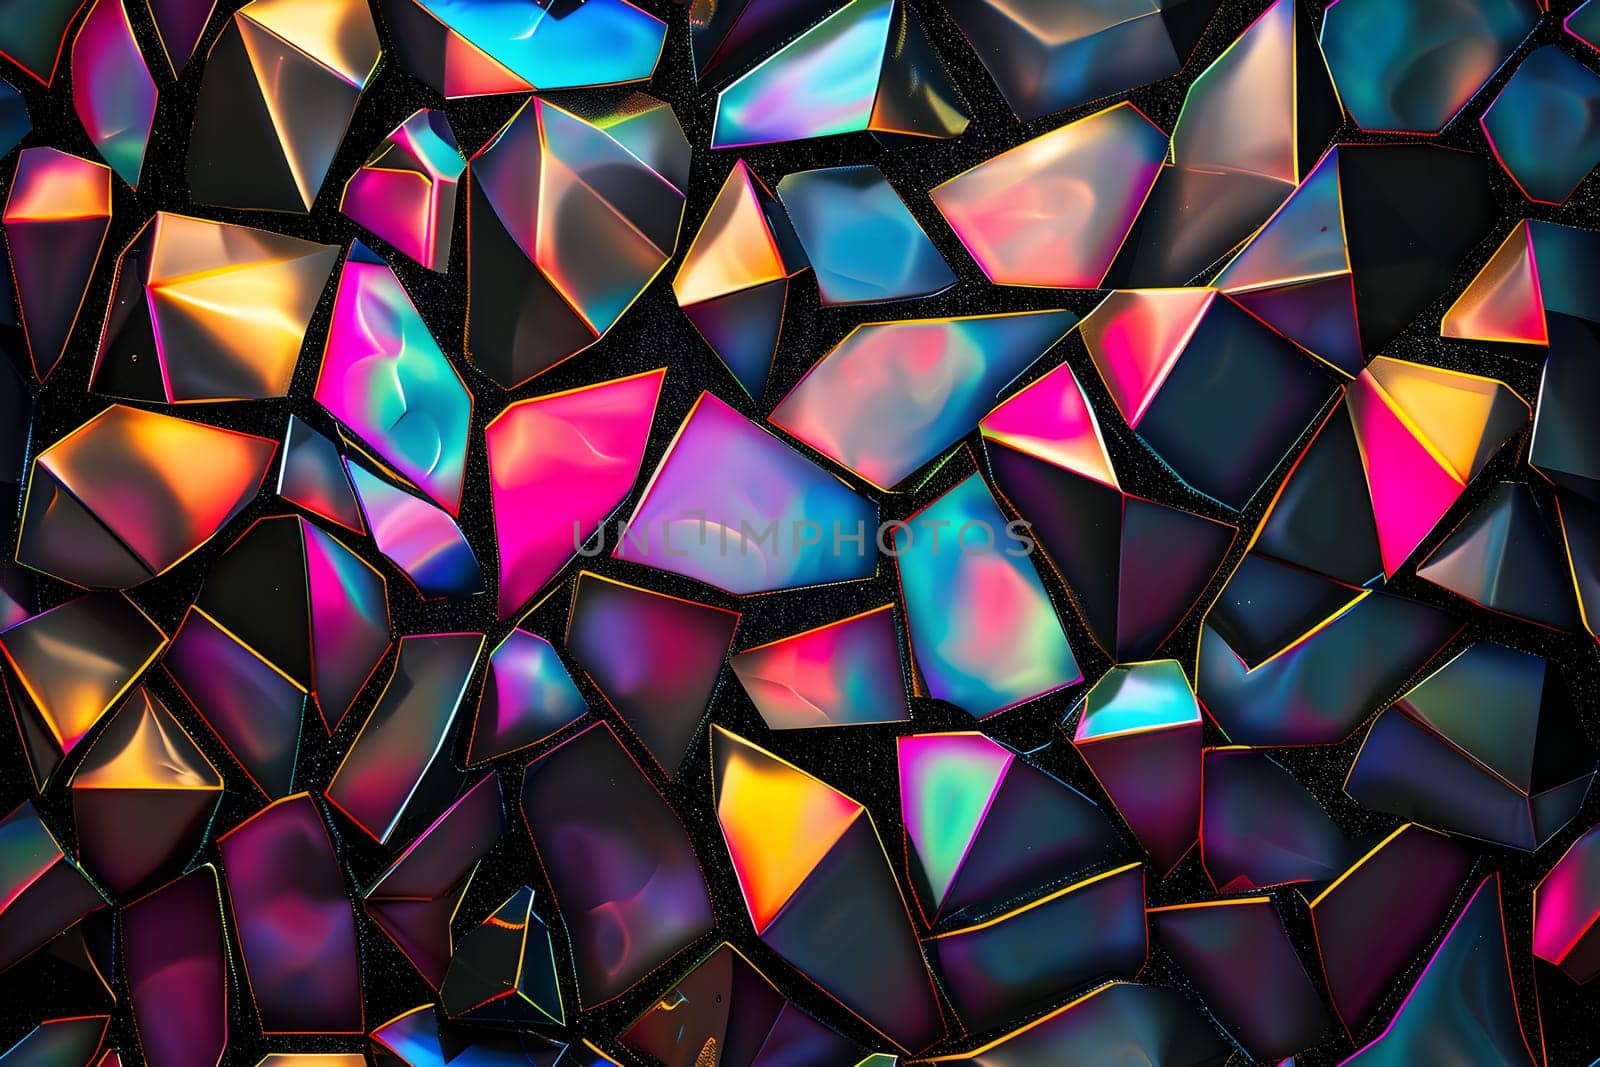 Seamless texture and full-frame background of colorful glass mosaic triangular tiles. Neural network generated image. Not based on any actual scene or pattern.